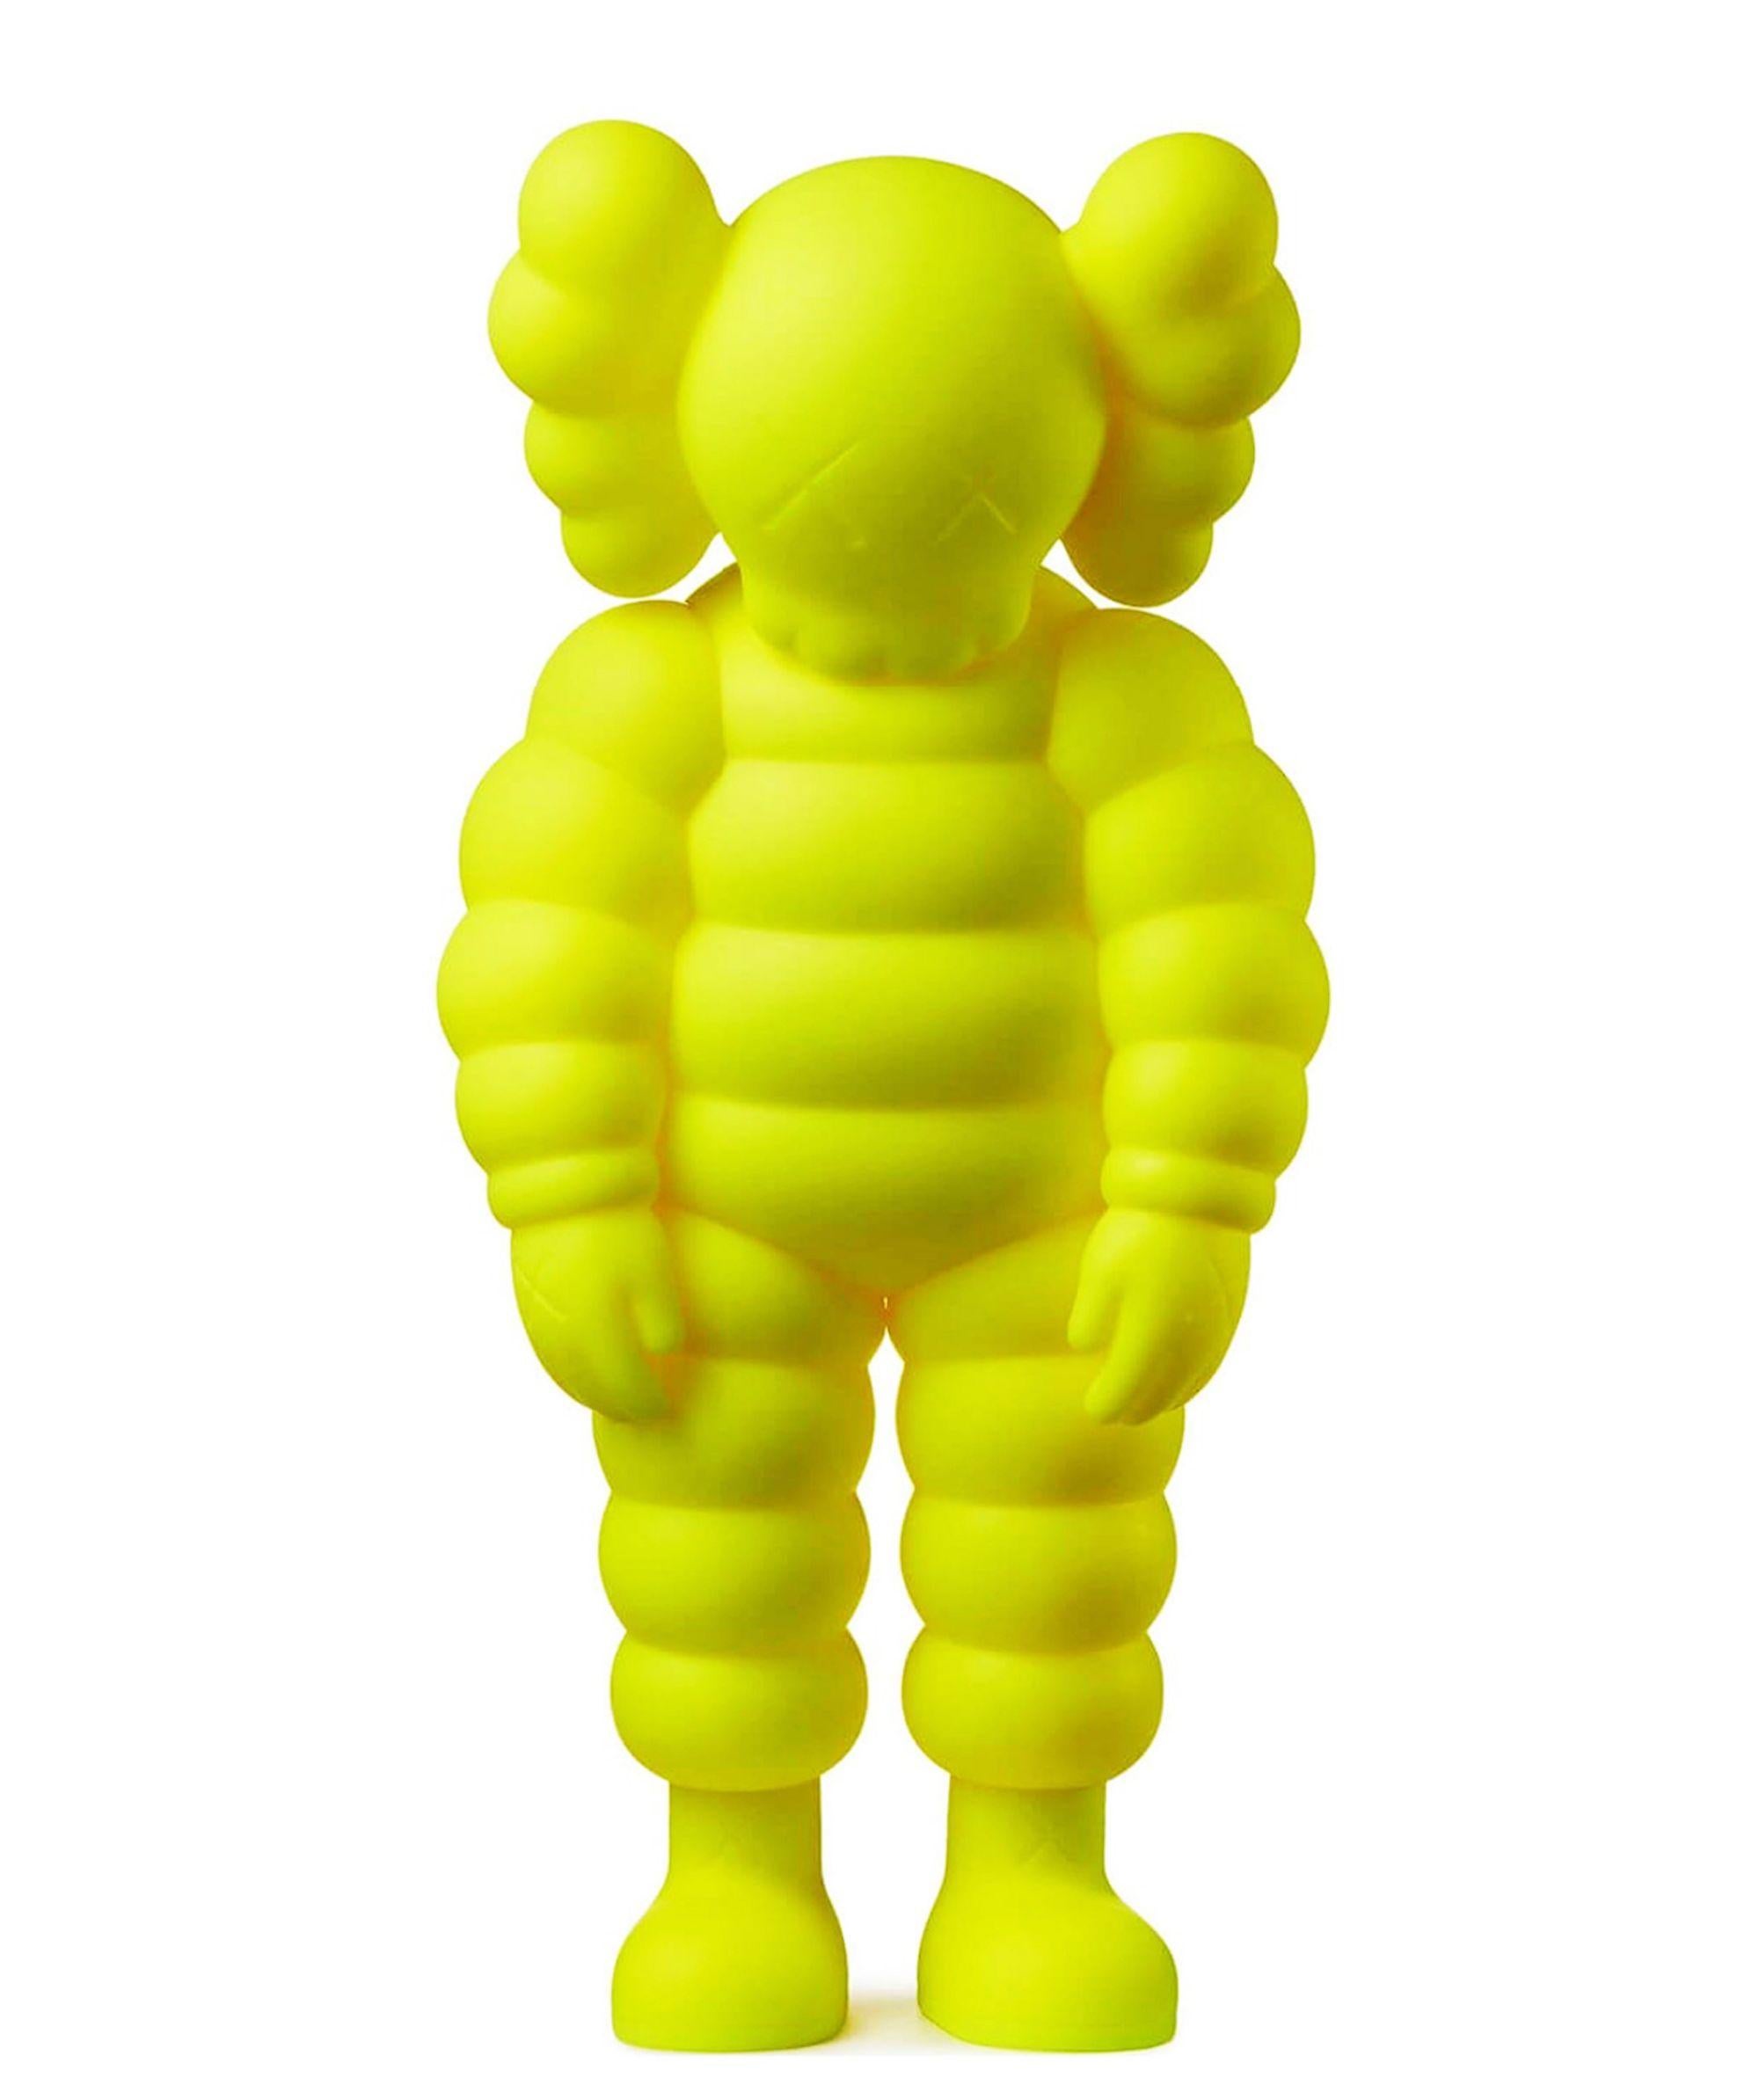 What Party - Chum (Yellow) - Sculpture by KAWS